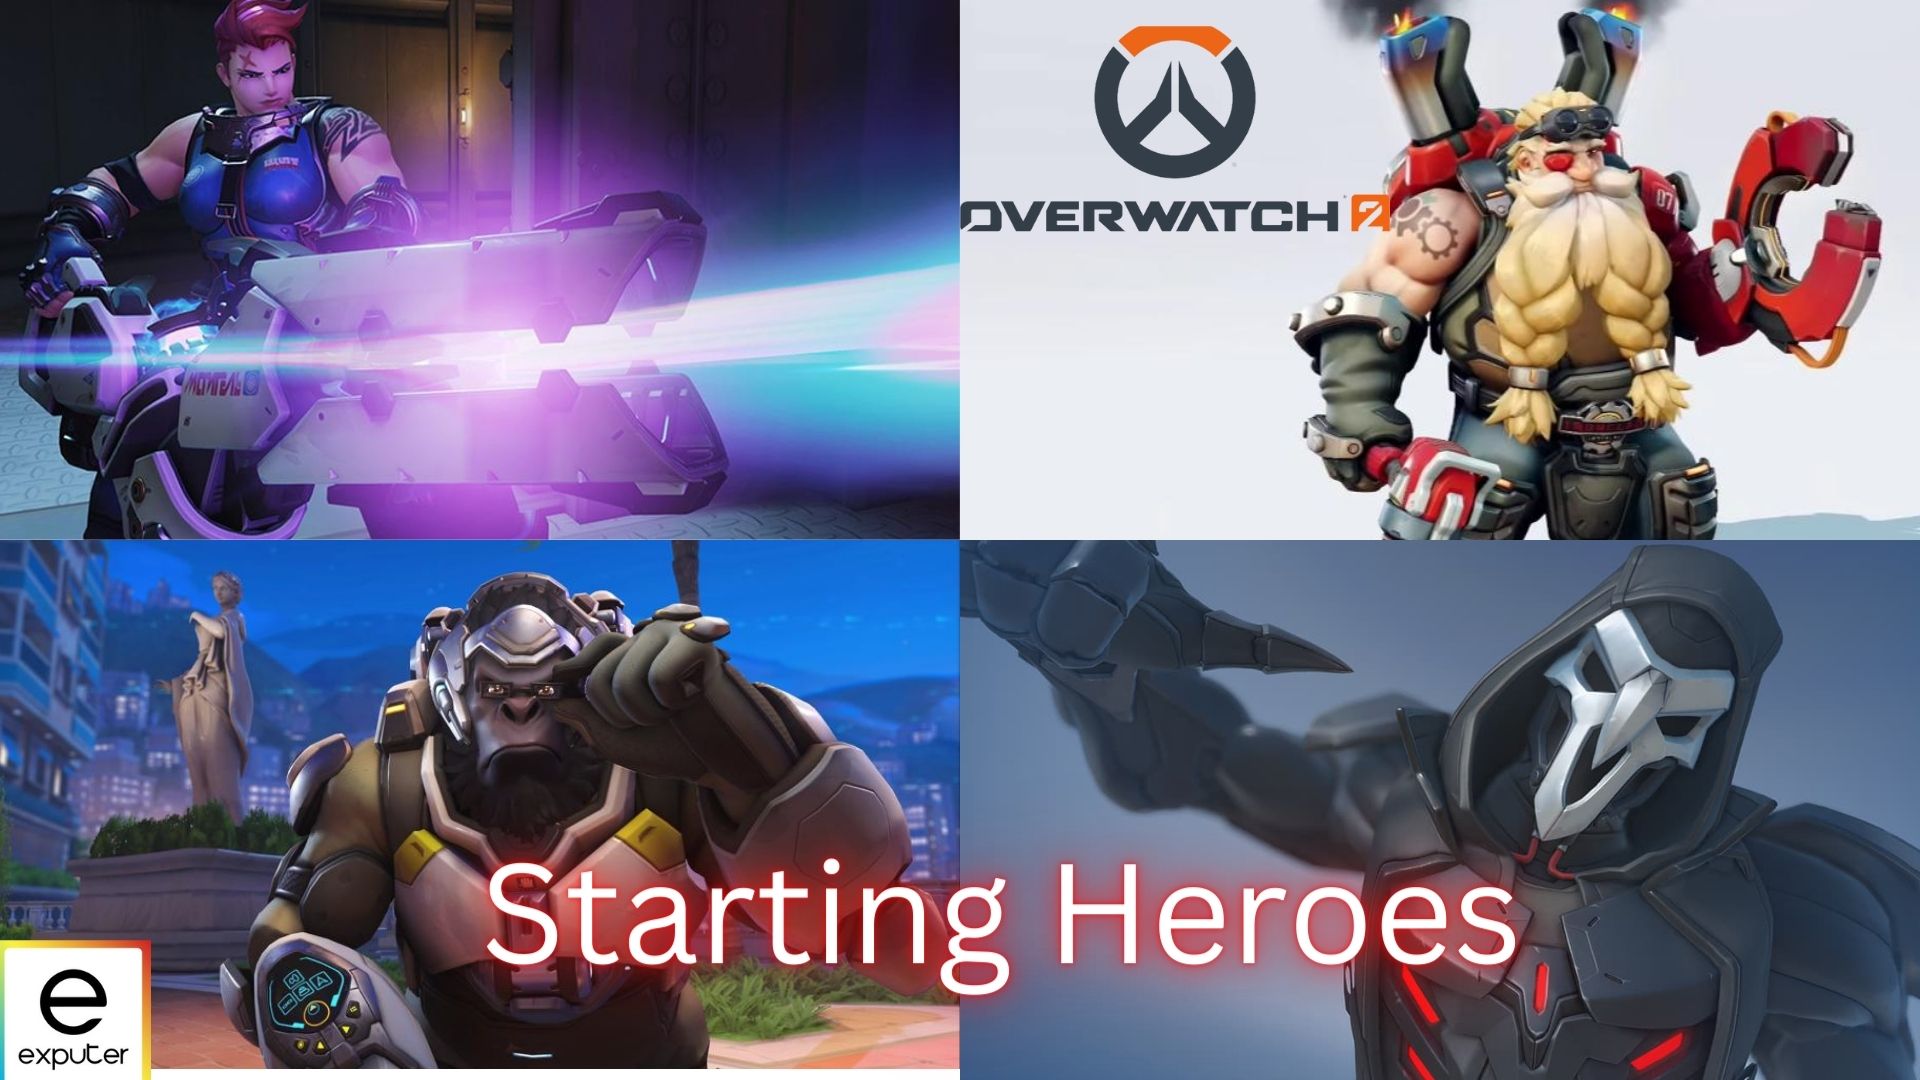 Overwatch 2 the starting heroes